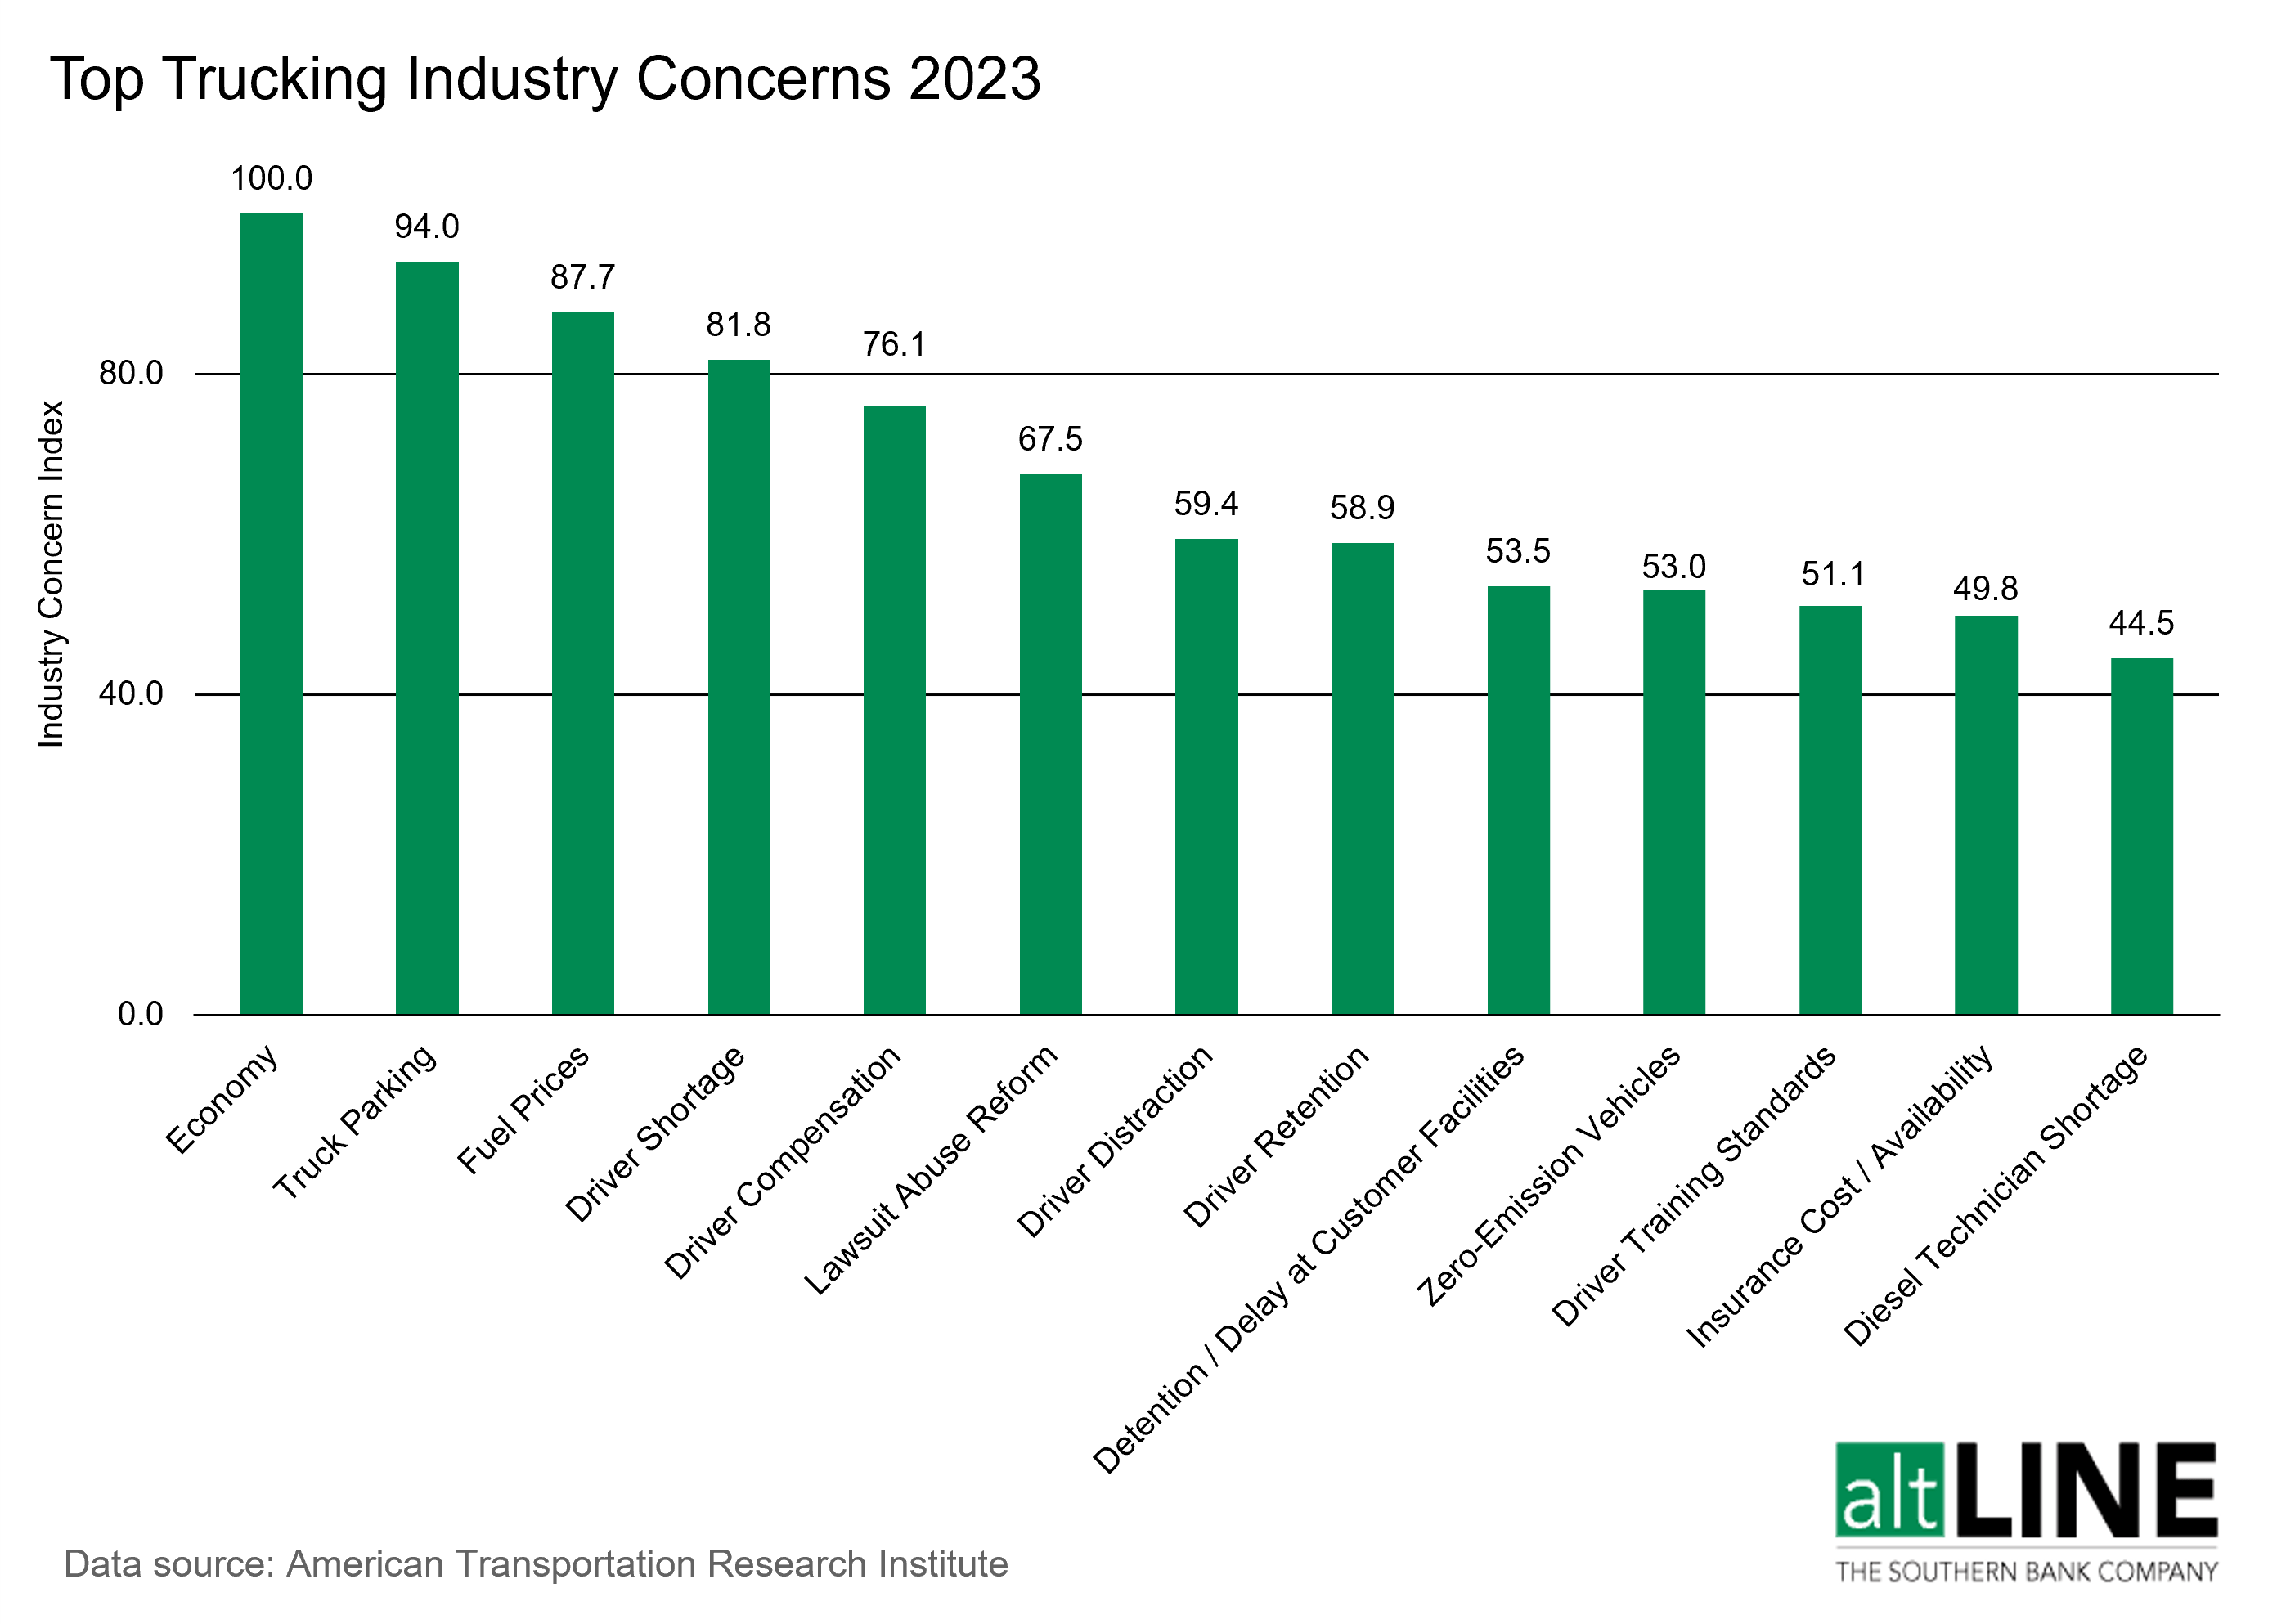 bar chart showing the top trucking industry concerns of 2023